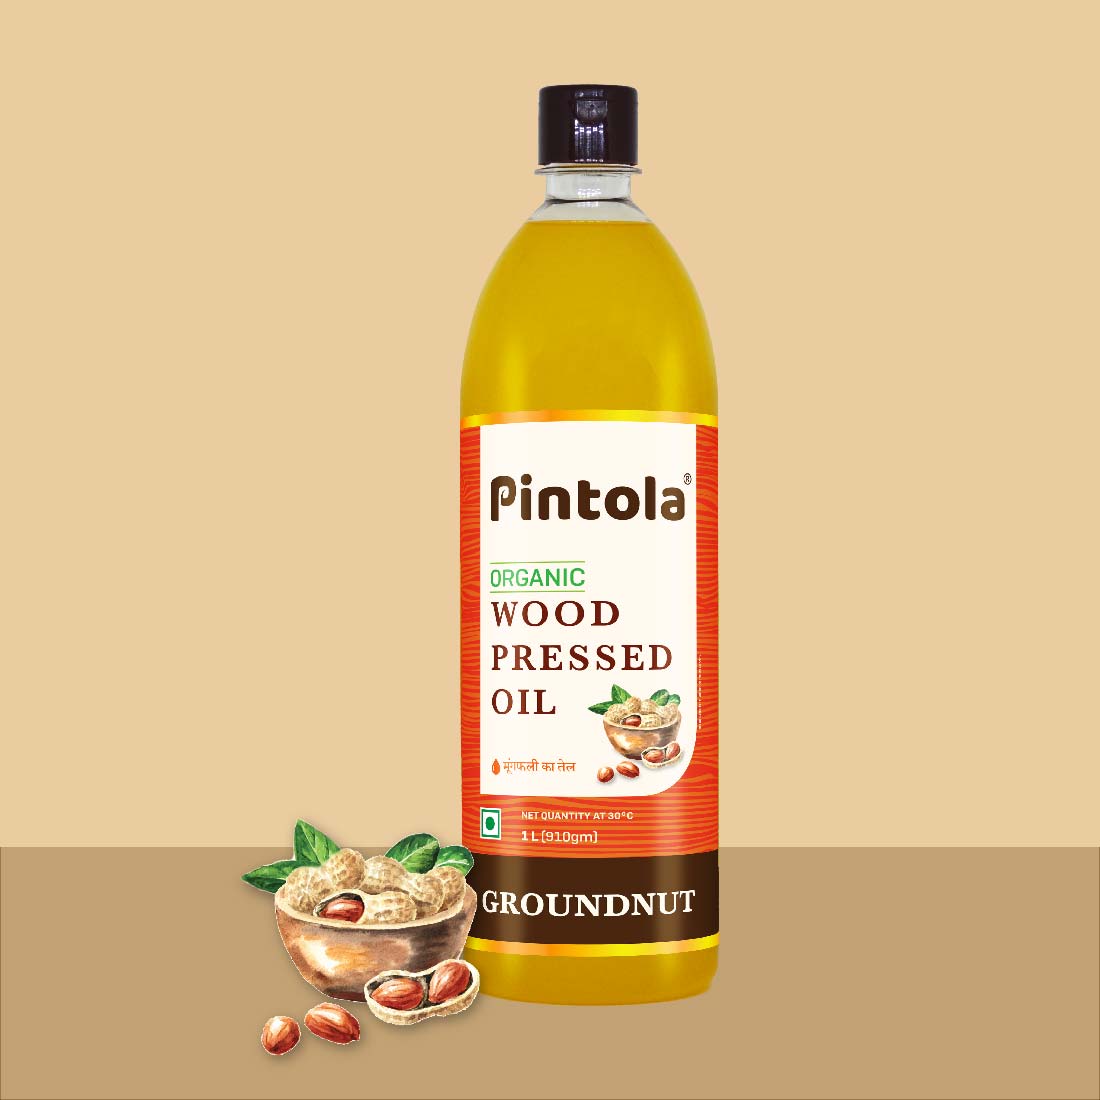 Pintola Organic Groundnut WoodPressed Oil - Certified Organic and Chemical-Free (1000 ml)